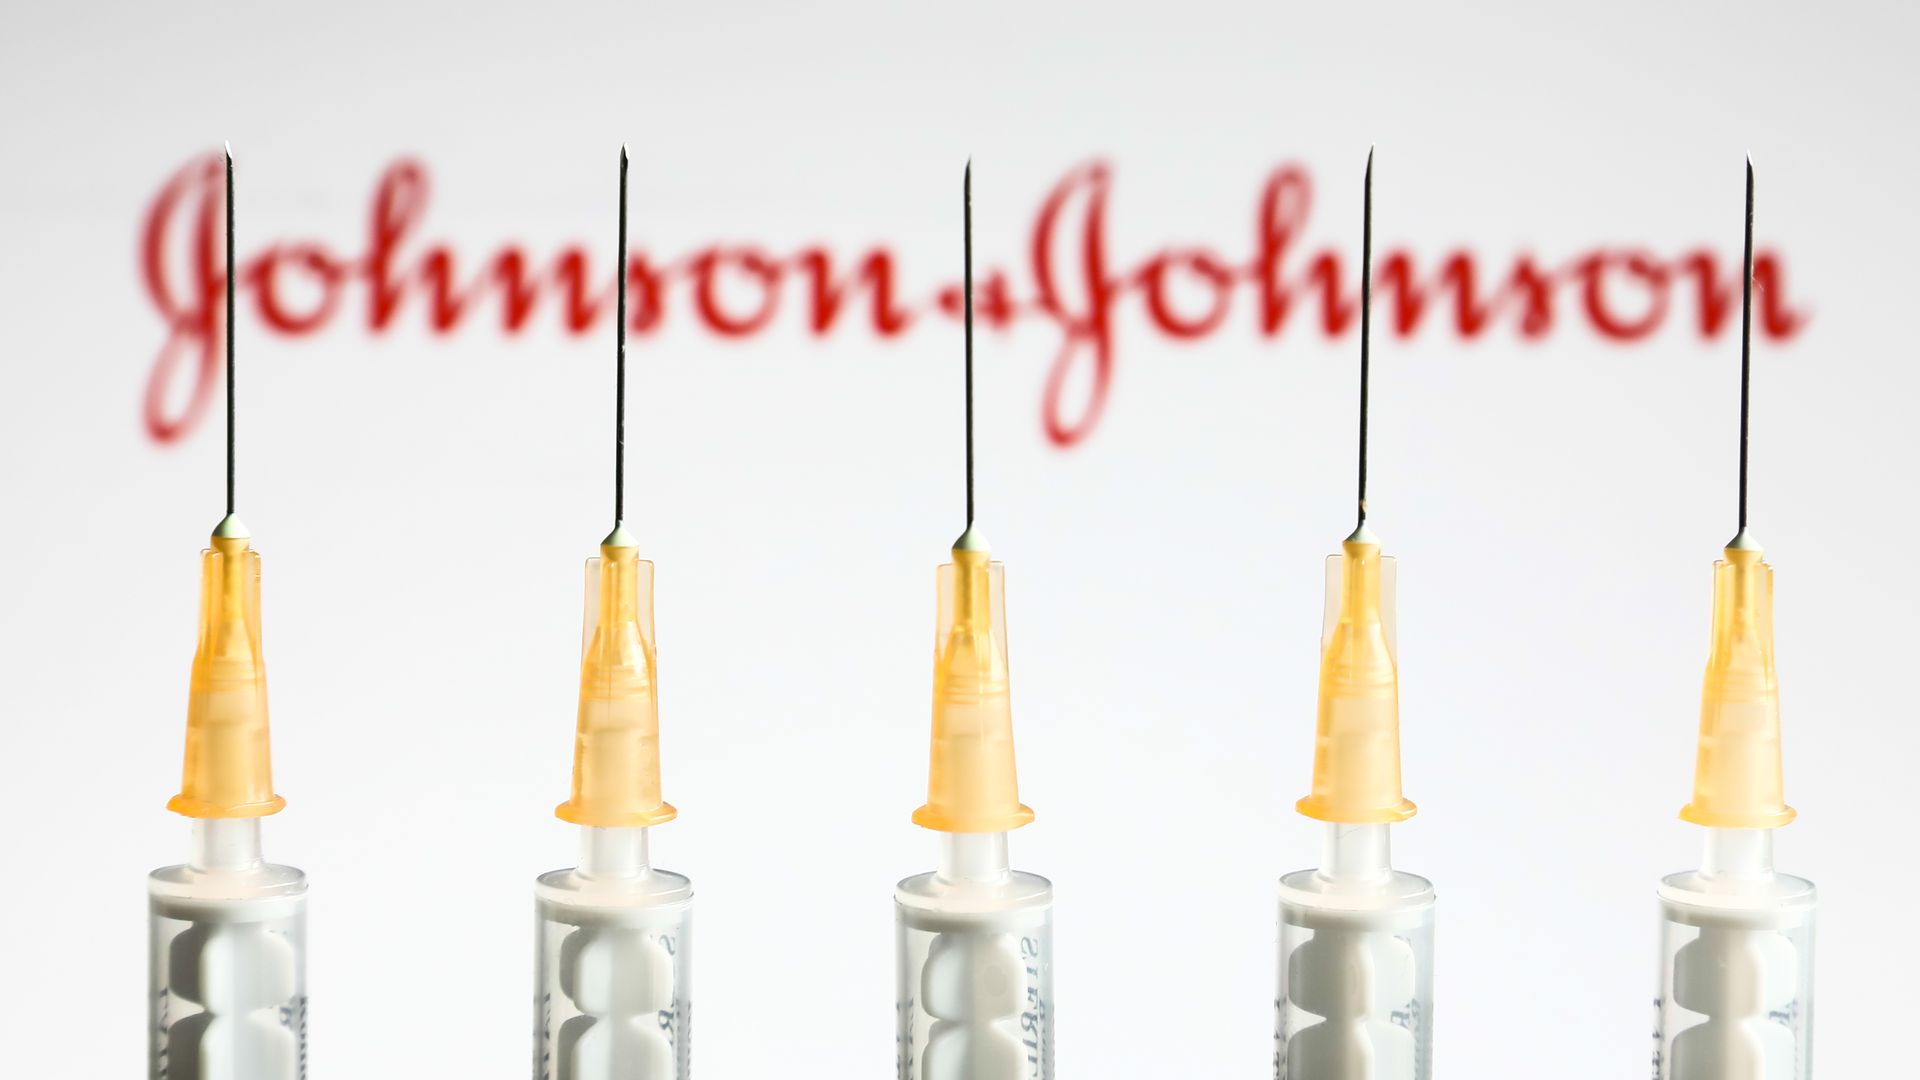 PICTURE of syringes in front of a johnson & johnson logo